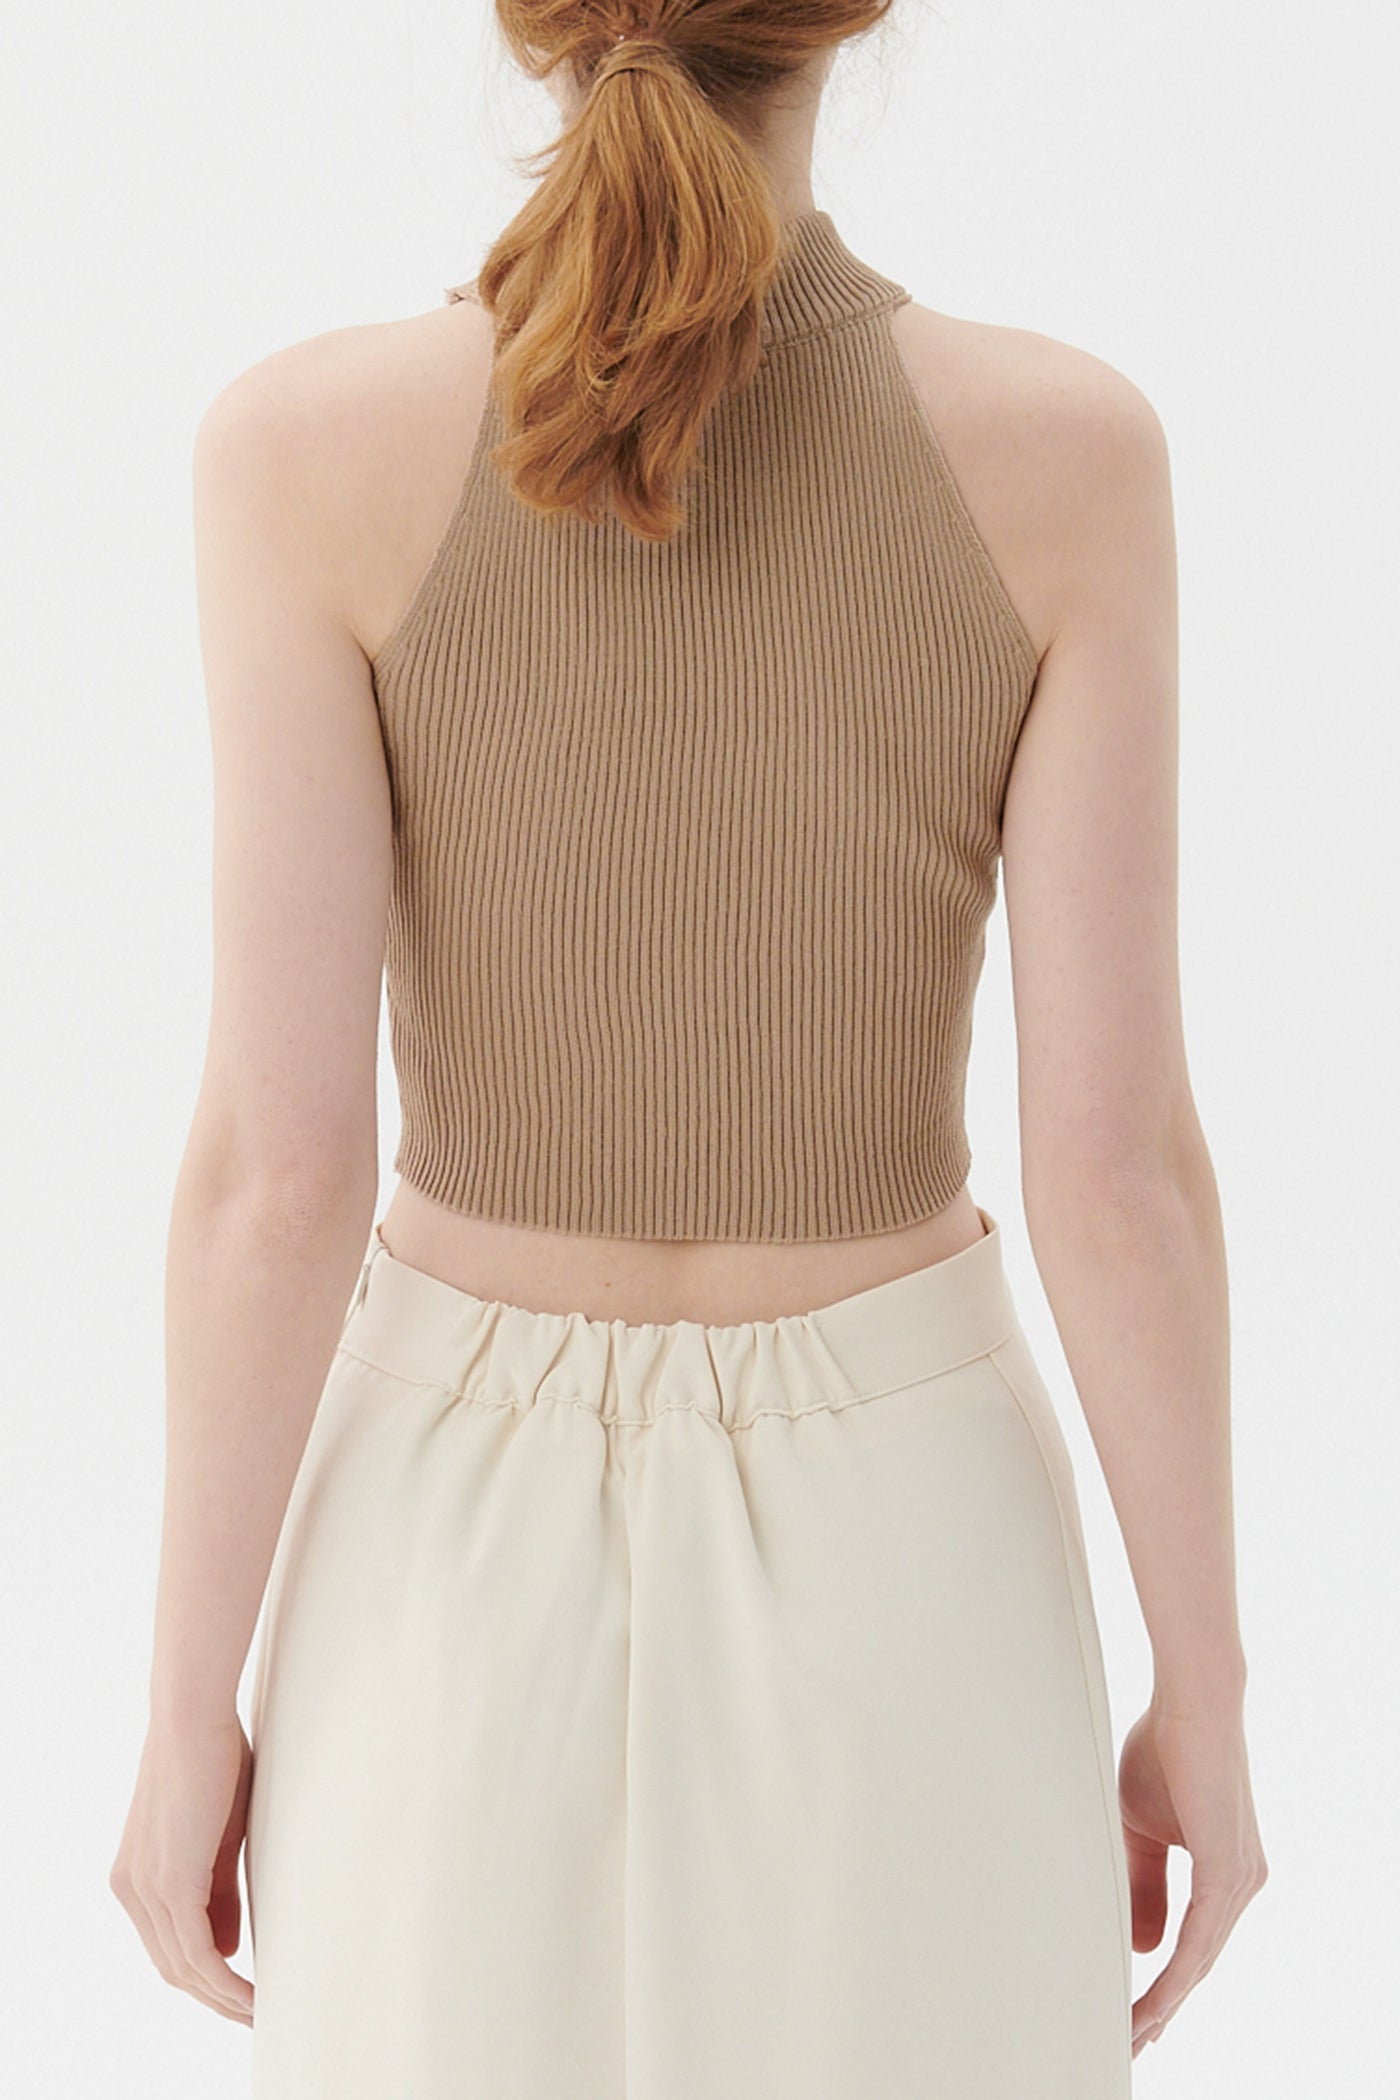 storets.com Finley Knitted Crop Top